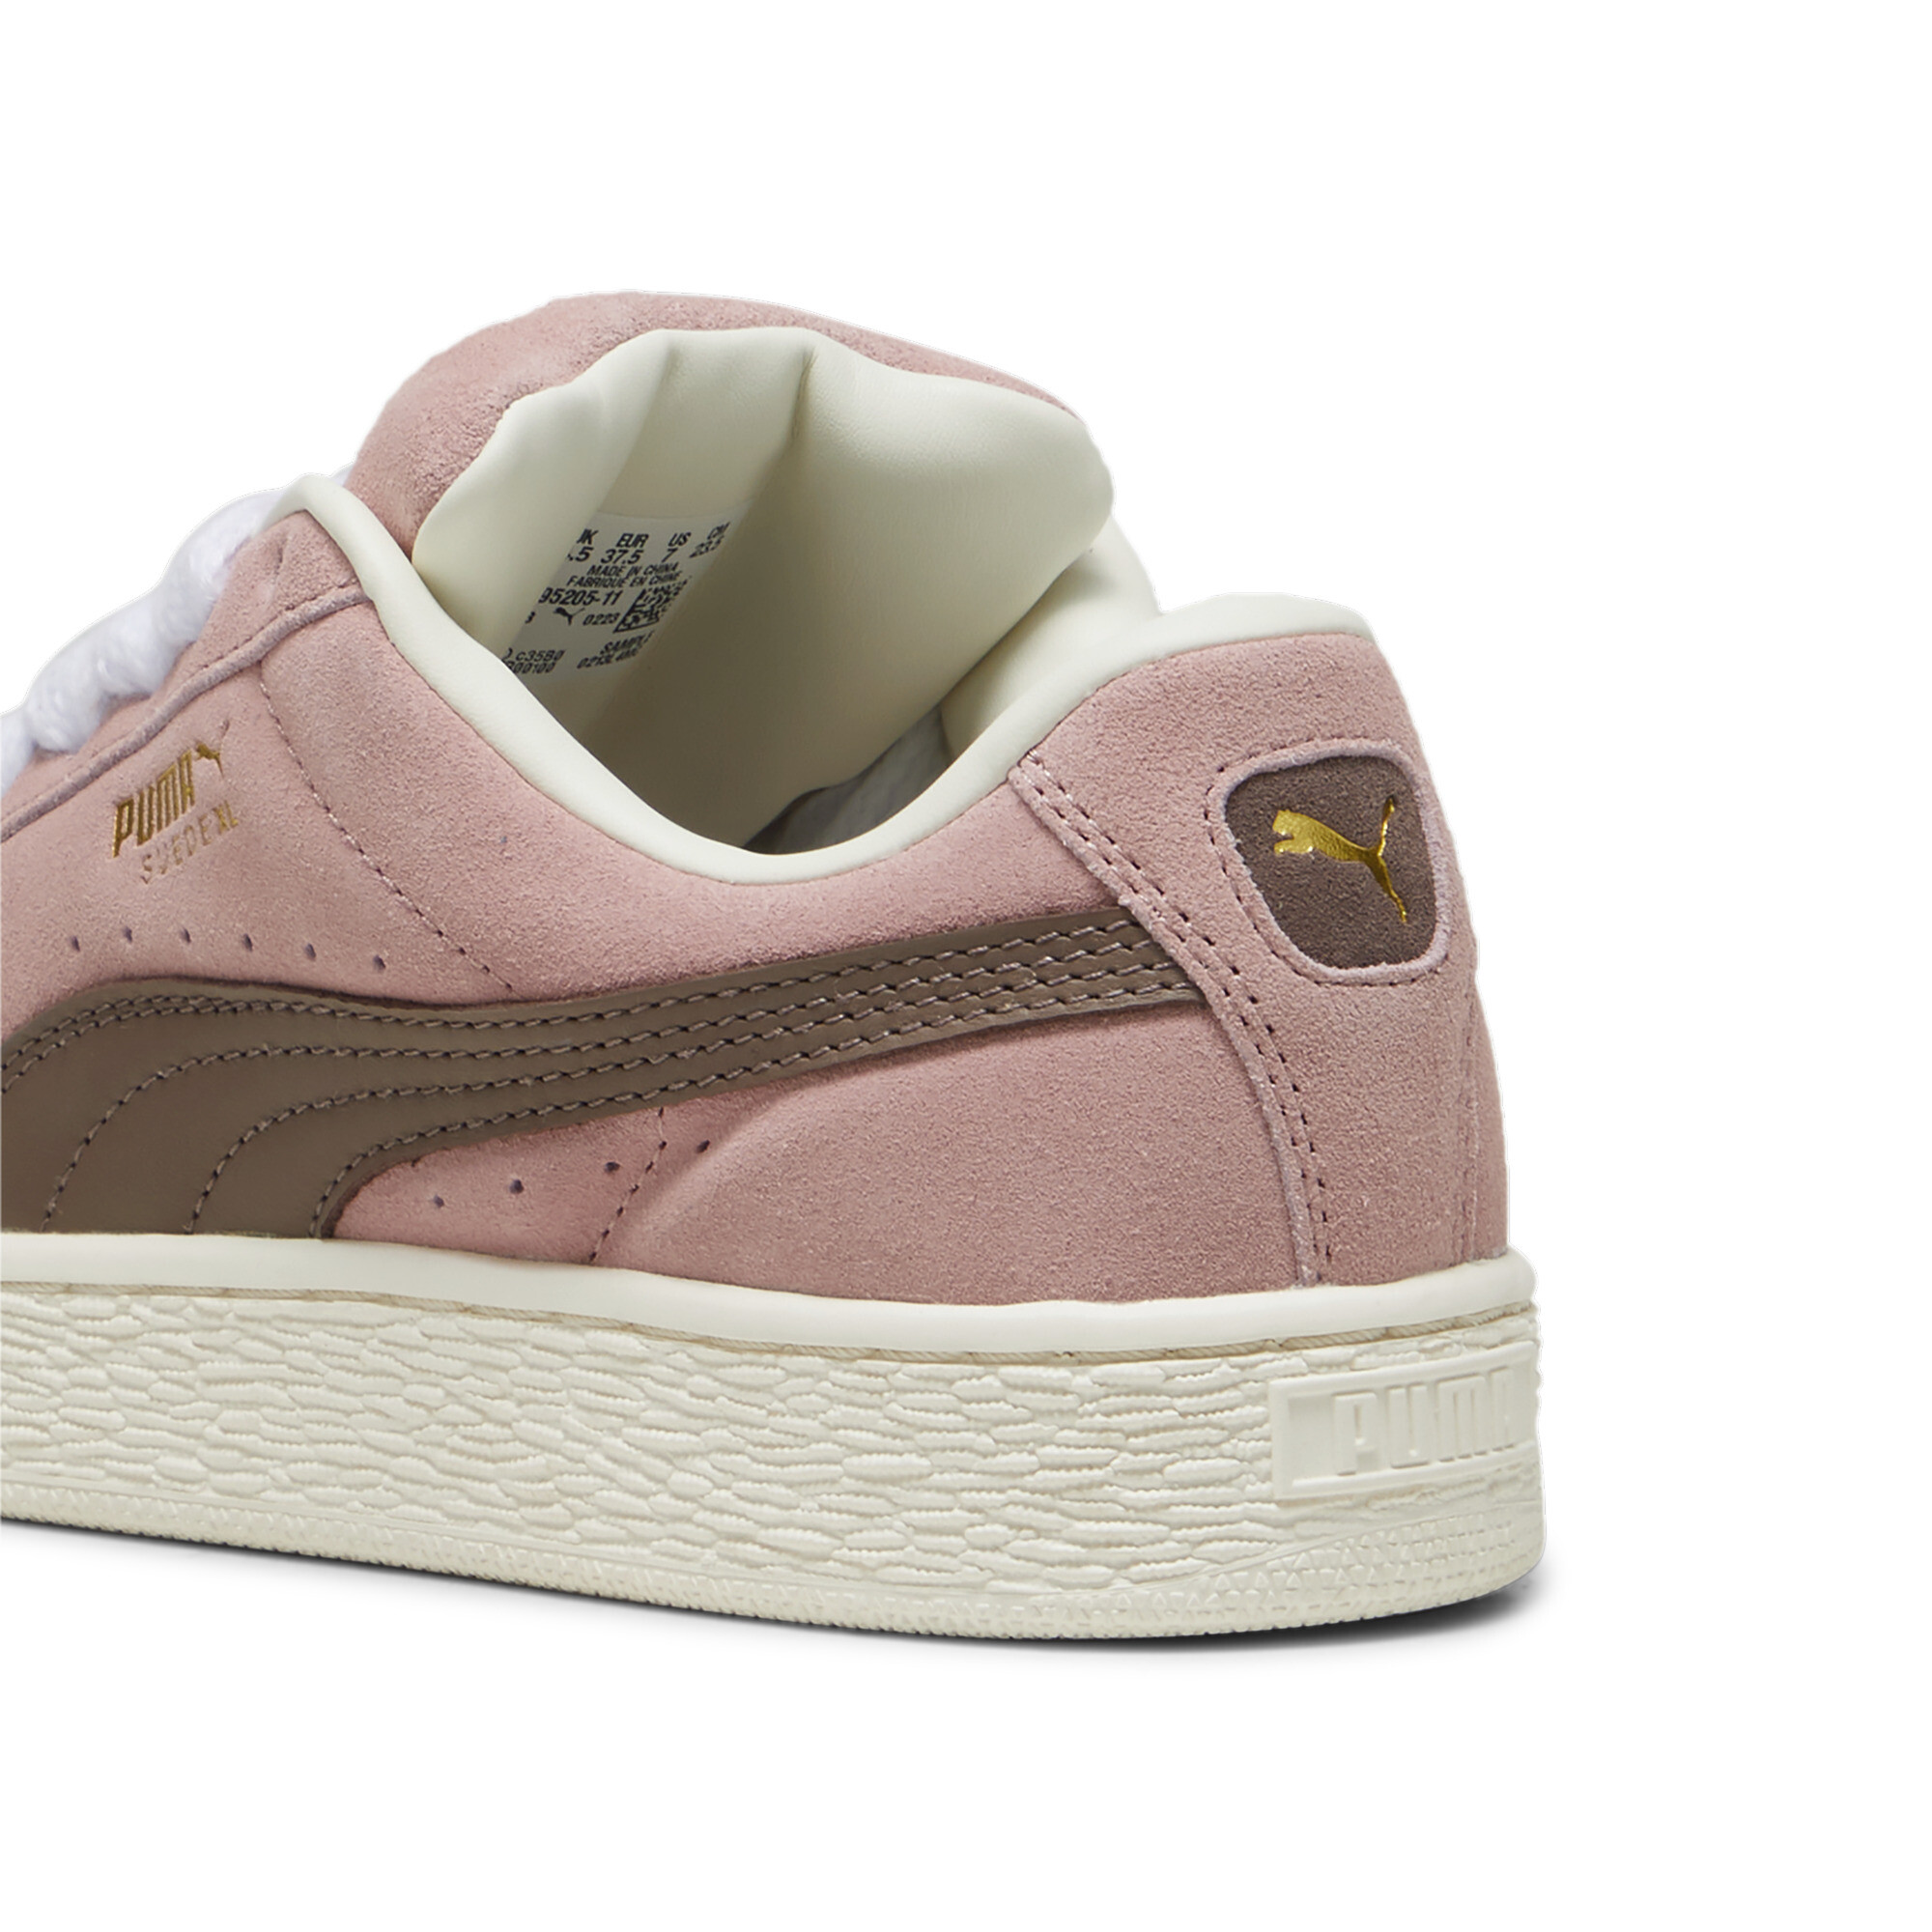 Puma Suede XL Sneakers Unisex, Pink, Size 37, Shoes